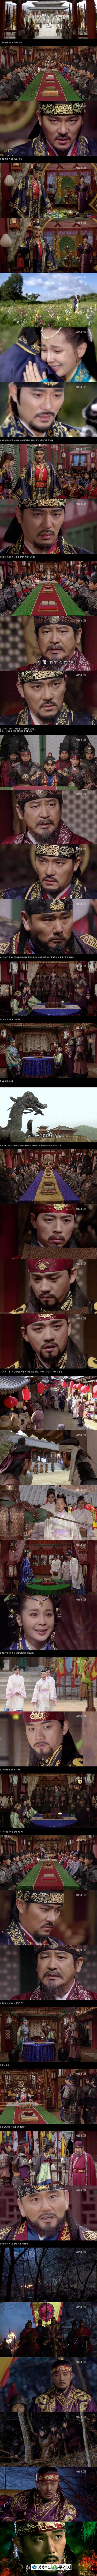 episodes 83 and 84 captures for the Korean drama 'Gwanggaeto the Great'